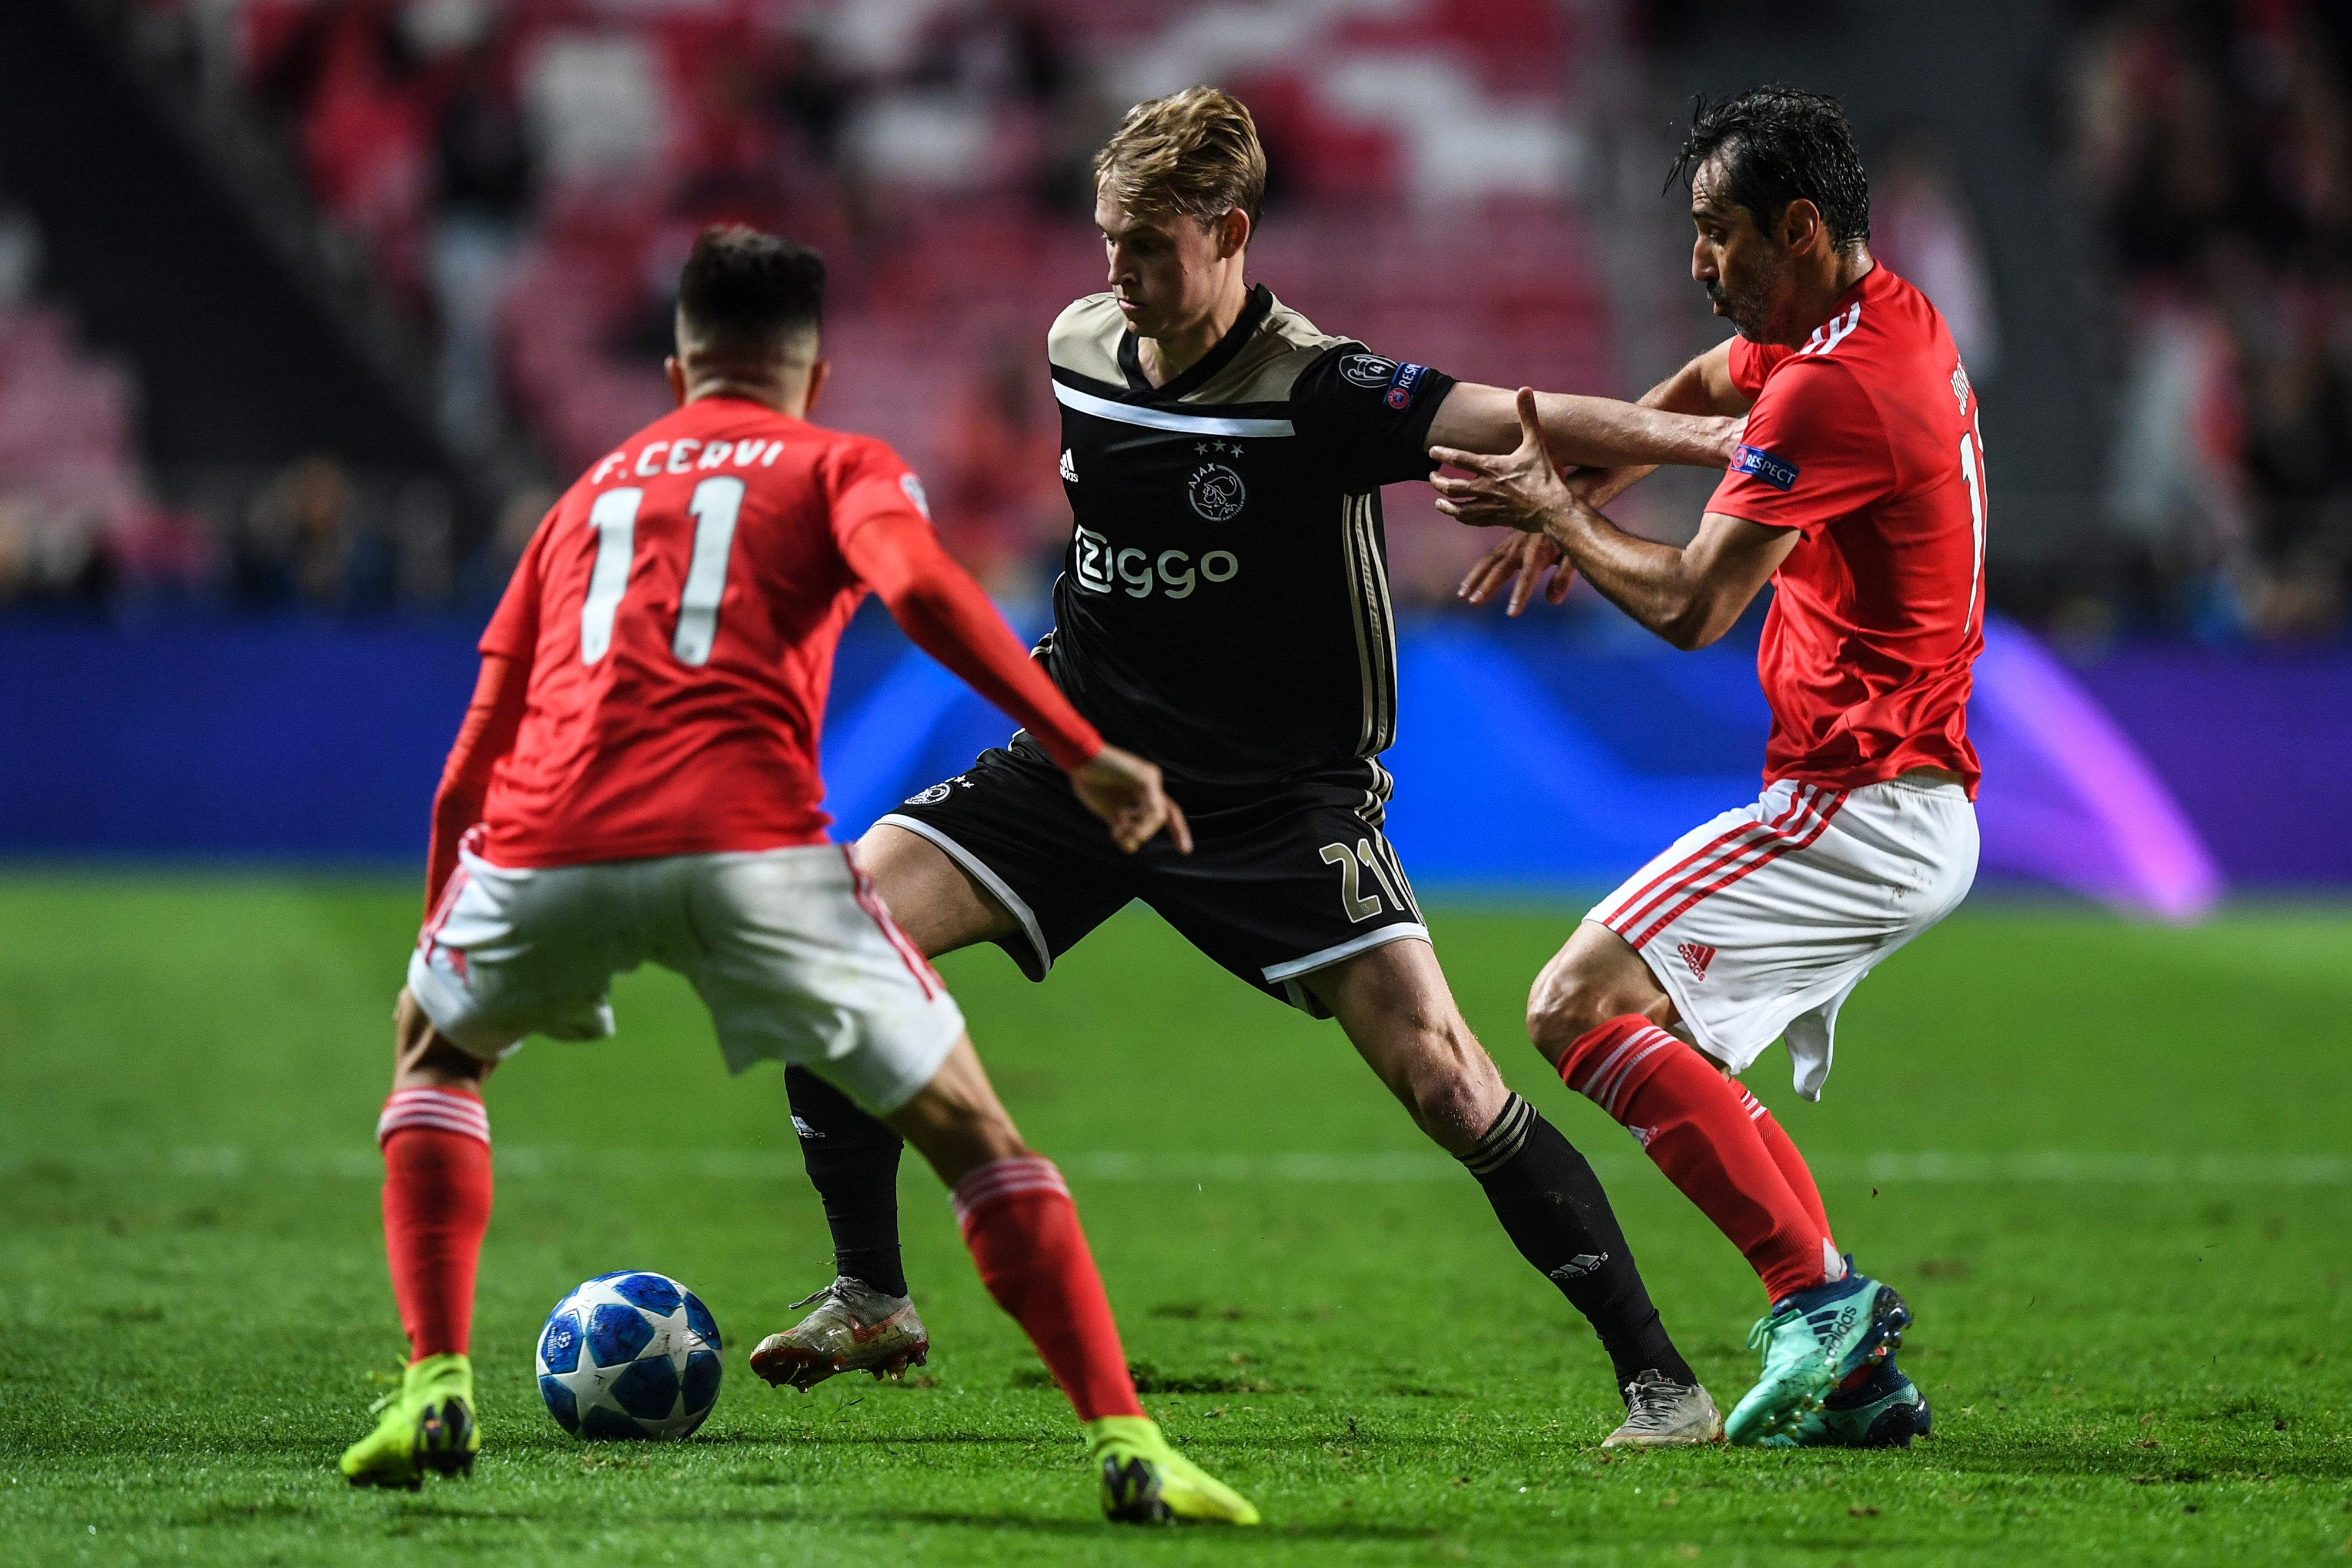 Ajax's Dutch midfielder Frenkie de Jong (C) challenges Benfica's Argentinian forward Franco Cervi (L) and Benfica's Brazilian forward Jonas during the UEFA Champions League group E football match between Benfica and Ajax at La Luz Stadium in Lisbon on November 7, 2018. (Photo by PATRICIA DE MELO MOREIRA / AFP)        (Photo credit should read PATRICIA DE MELO MOREIRA/AFP/Getty Images)